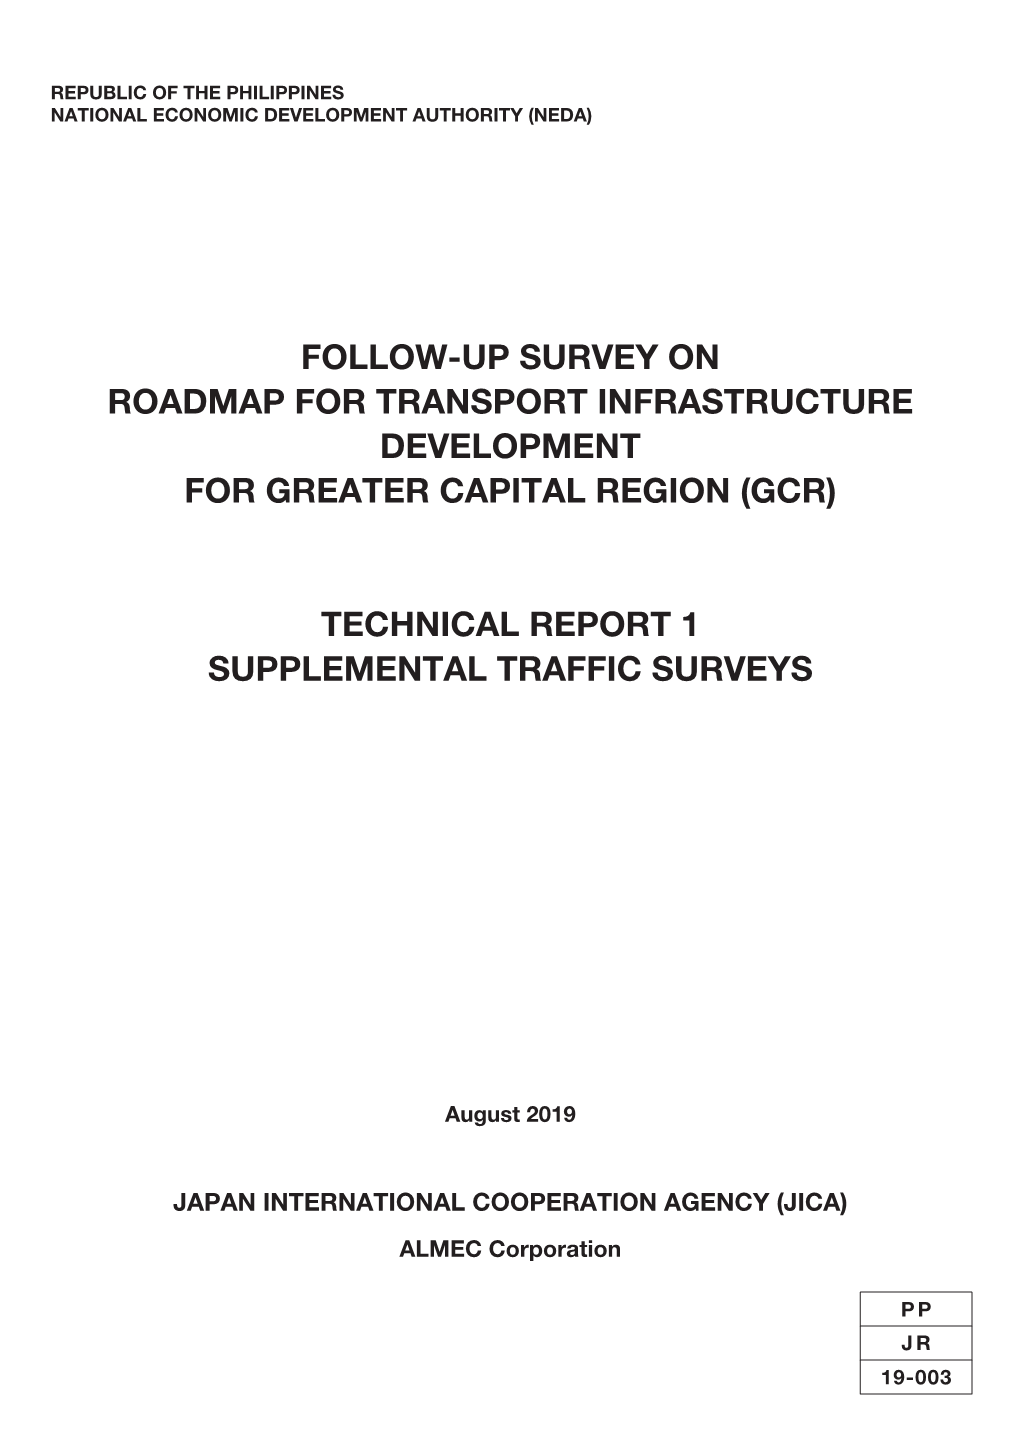 Follow-Up Survey on Roadmap for Transport Infrastructure Development for Greater Capital Region (Gcr)